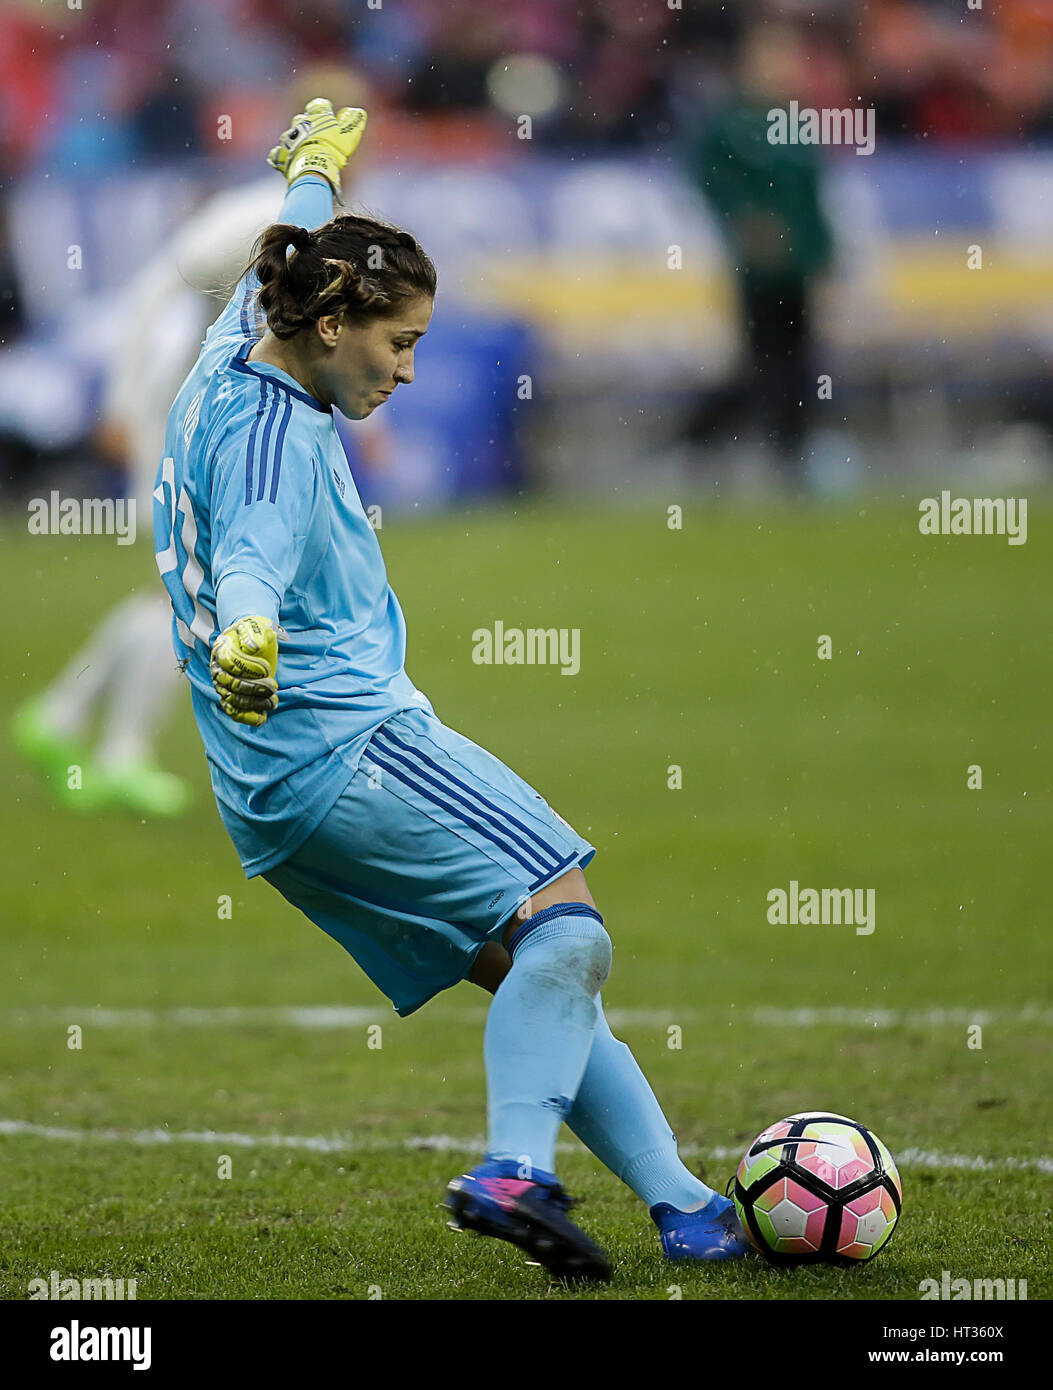 Washington DC, USA. 7th Mar, 2017. German Women's National Team Goalkeeper #21 Lisa WeiB clears the ball during a soccer match as part of the SheBelieve Cup 2017 between Germany and England at RFK Stadium in Washington DC. Germany defeats England, 1-0. Justin Cooper/CSM/Alamy Live News Stock Photo